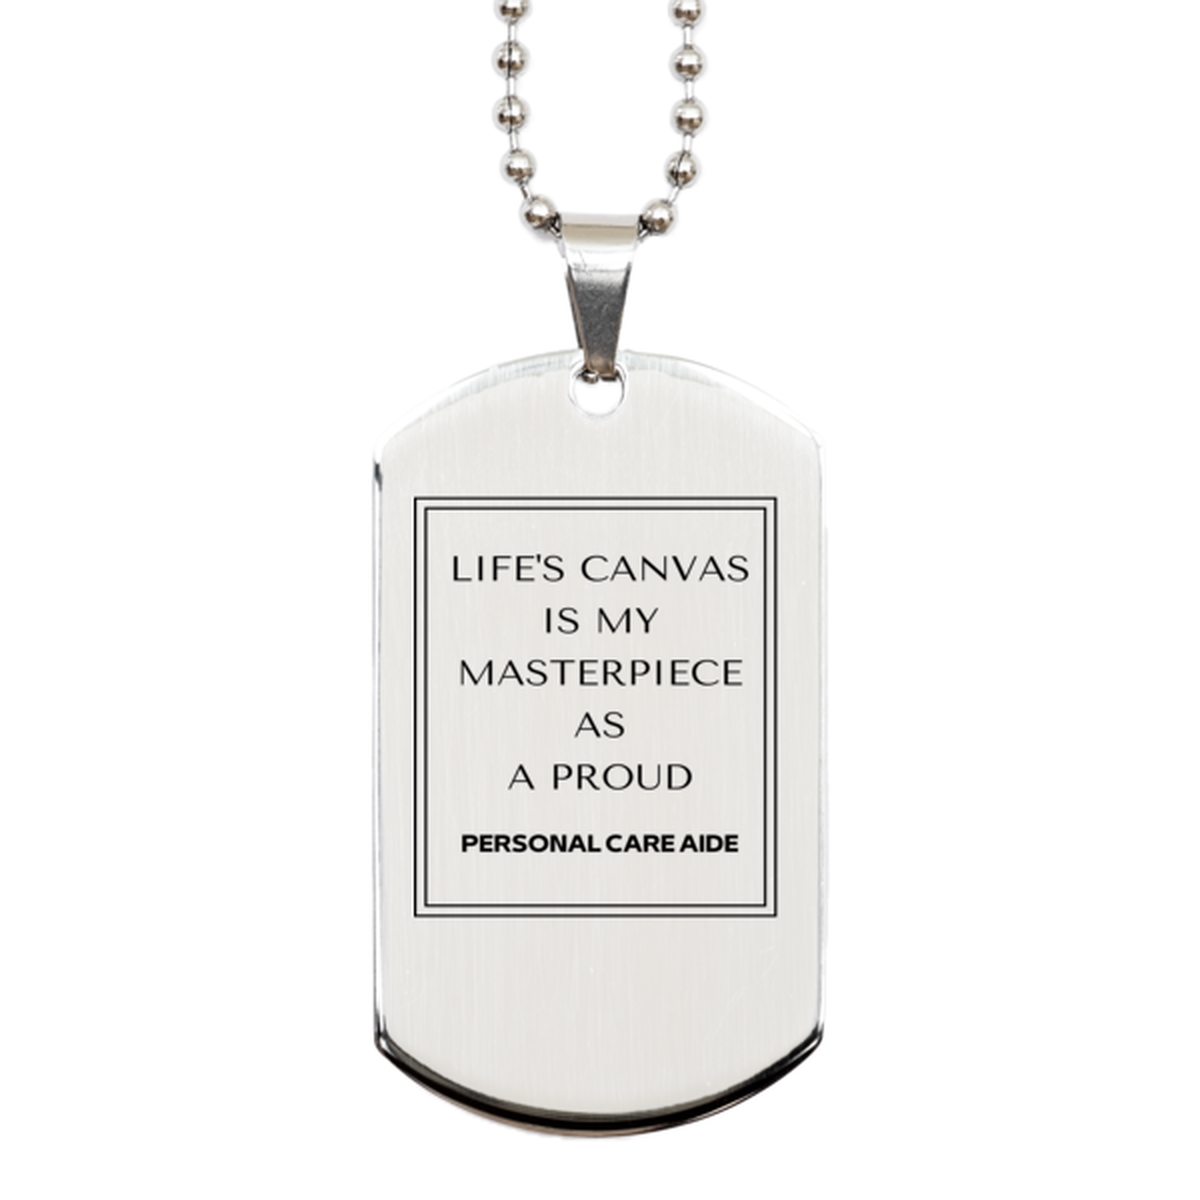 Proud Personal Care Aide Gifts, Life's canvas is my masterpiece, Epic Birthday Christmas Unique Silver Dog Tag For Personal Care Aide, Coworkers, Men, Women, Friends